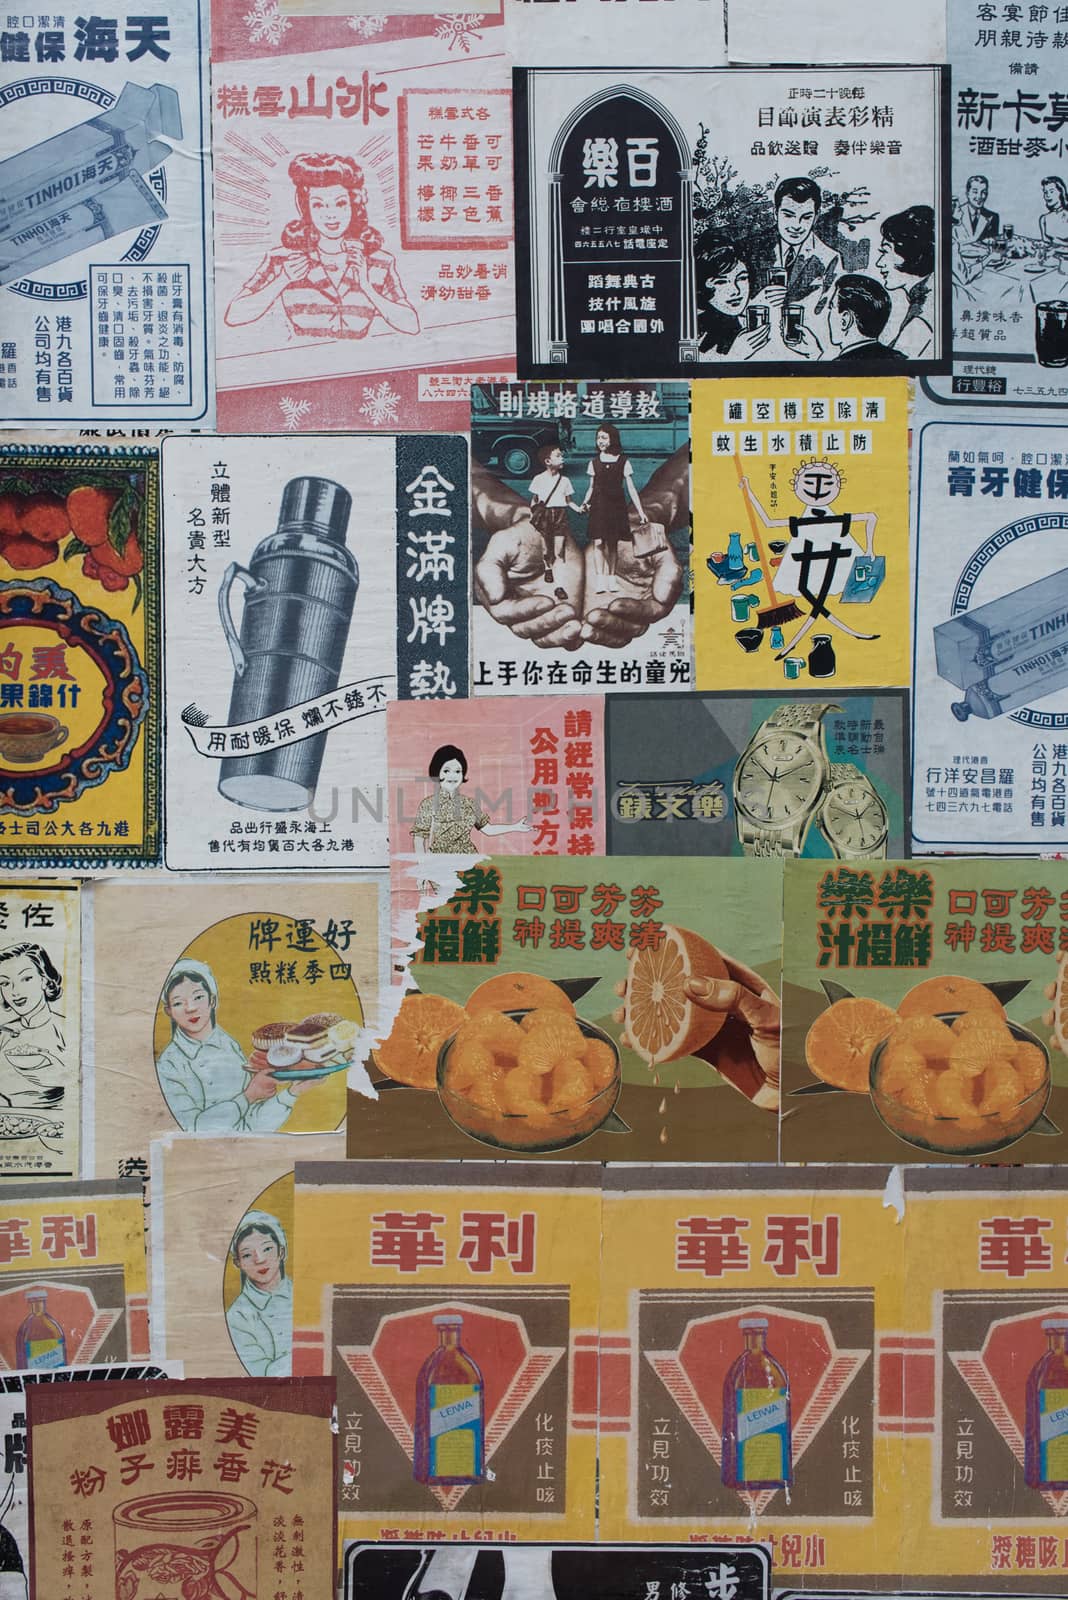 China retro and vintage advertising posters by MCVSN